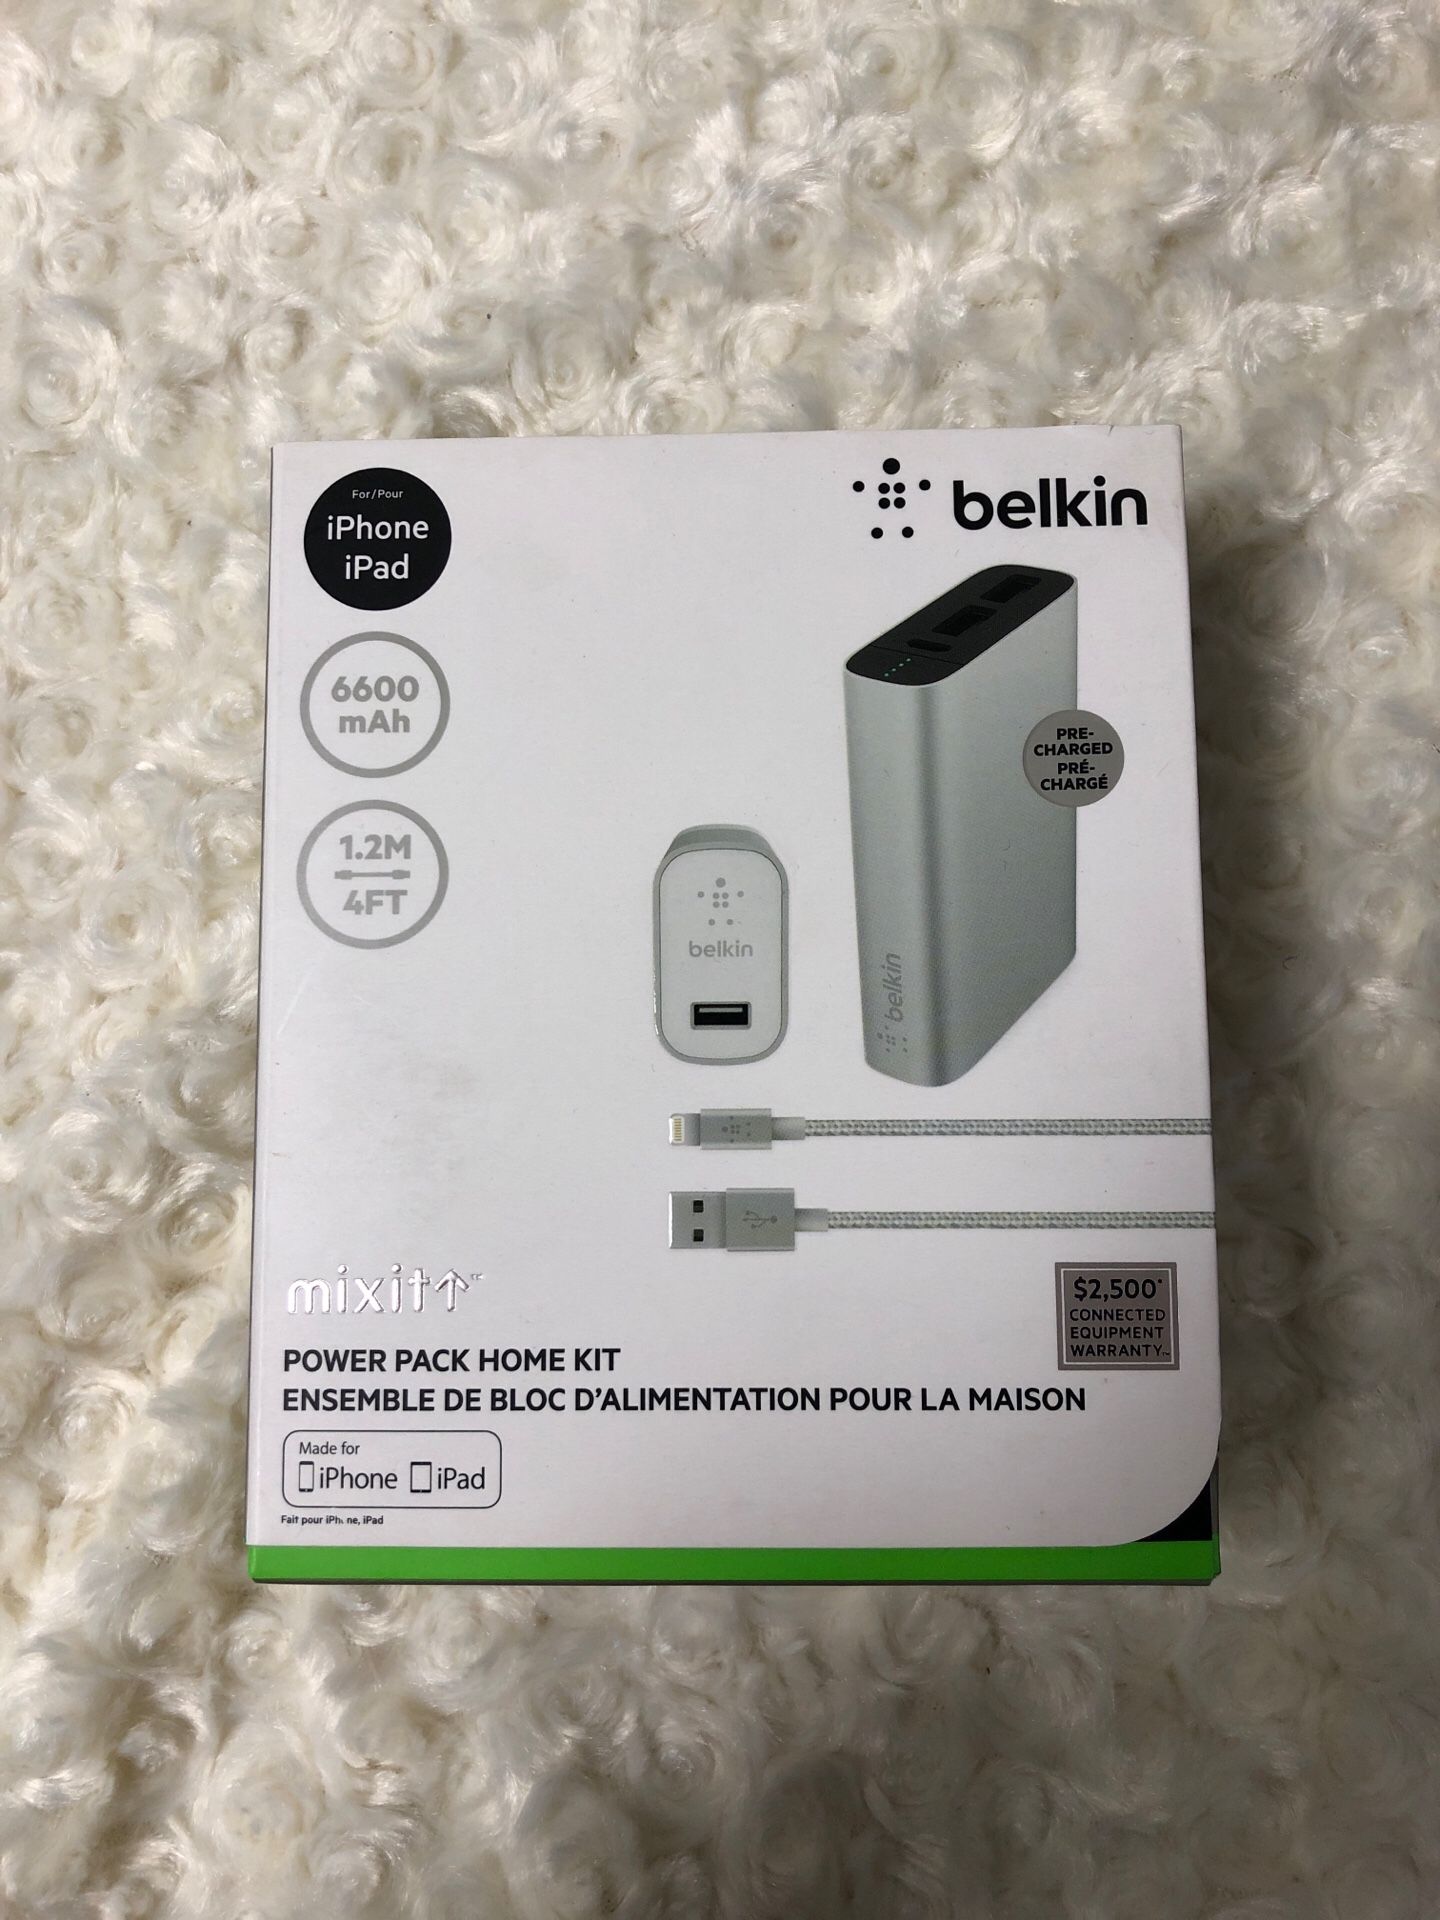 Belkin Power Pack Home Kit 4ft cable, 6600mAh for iPhone iPad